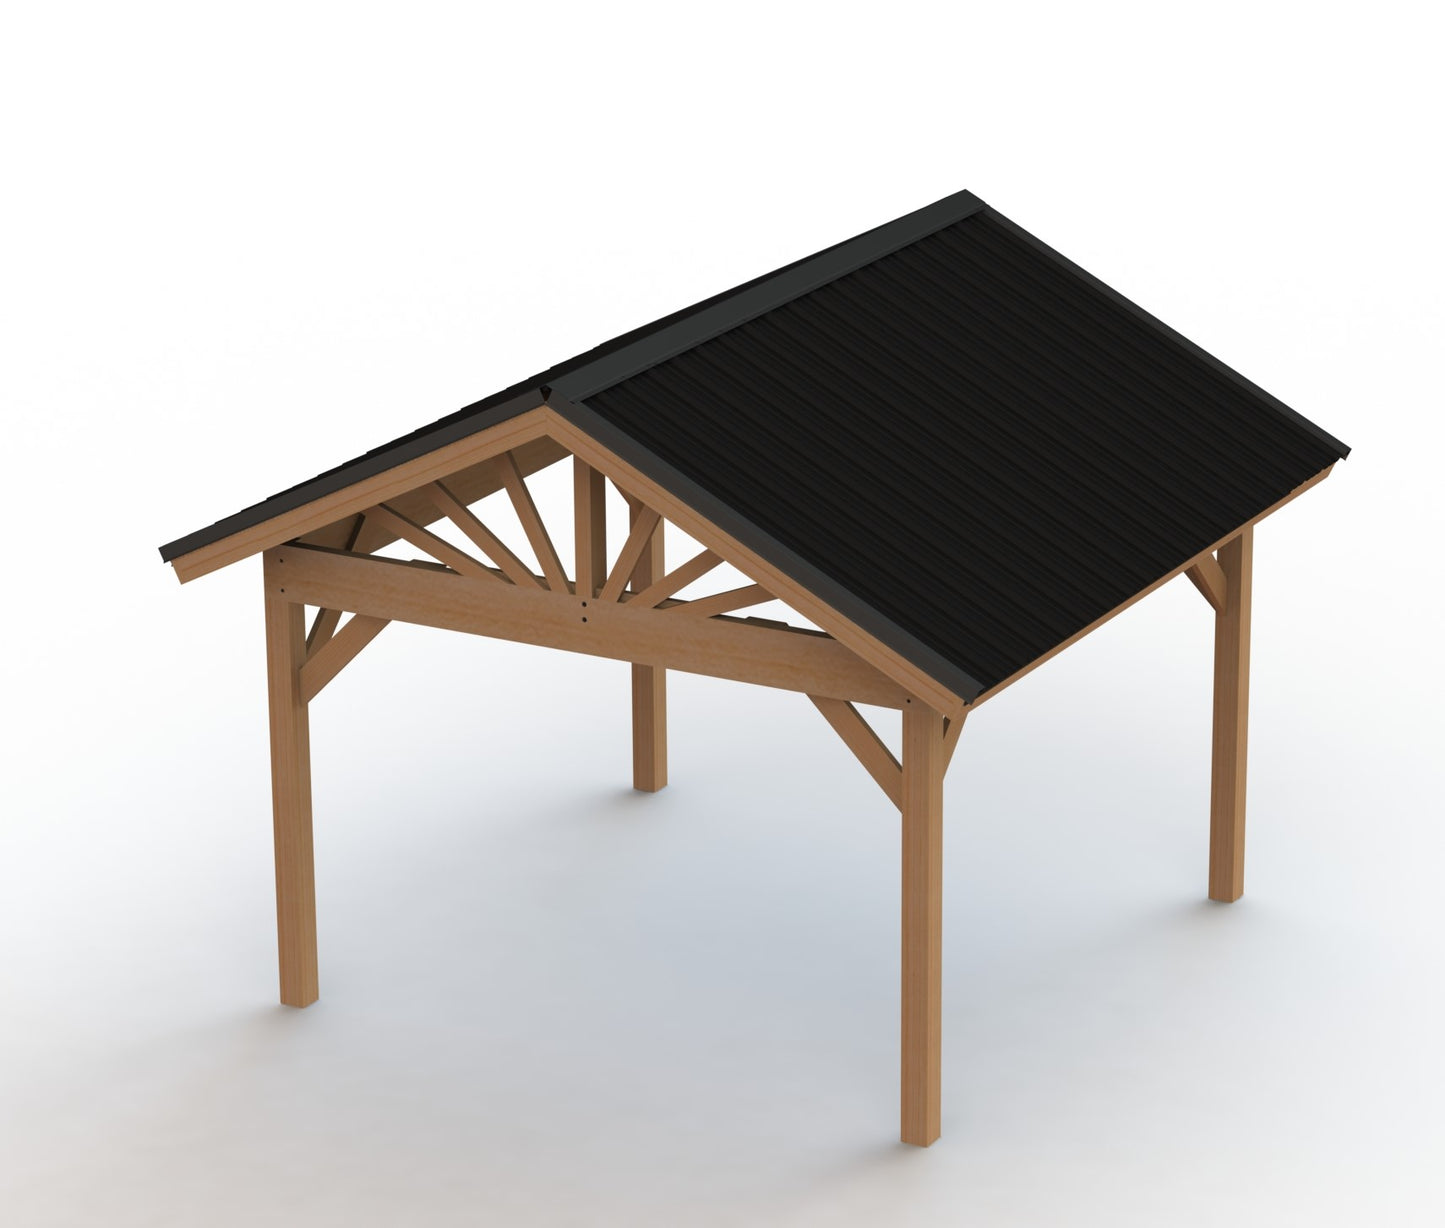 Gazebo Building Plans | Gable Metal Roof - Perfect for Hot Tubs 12'x12'